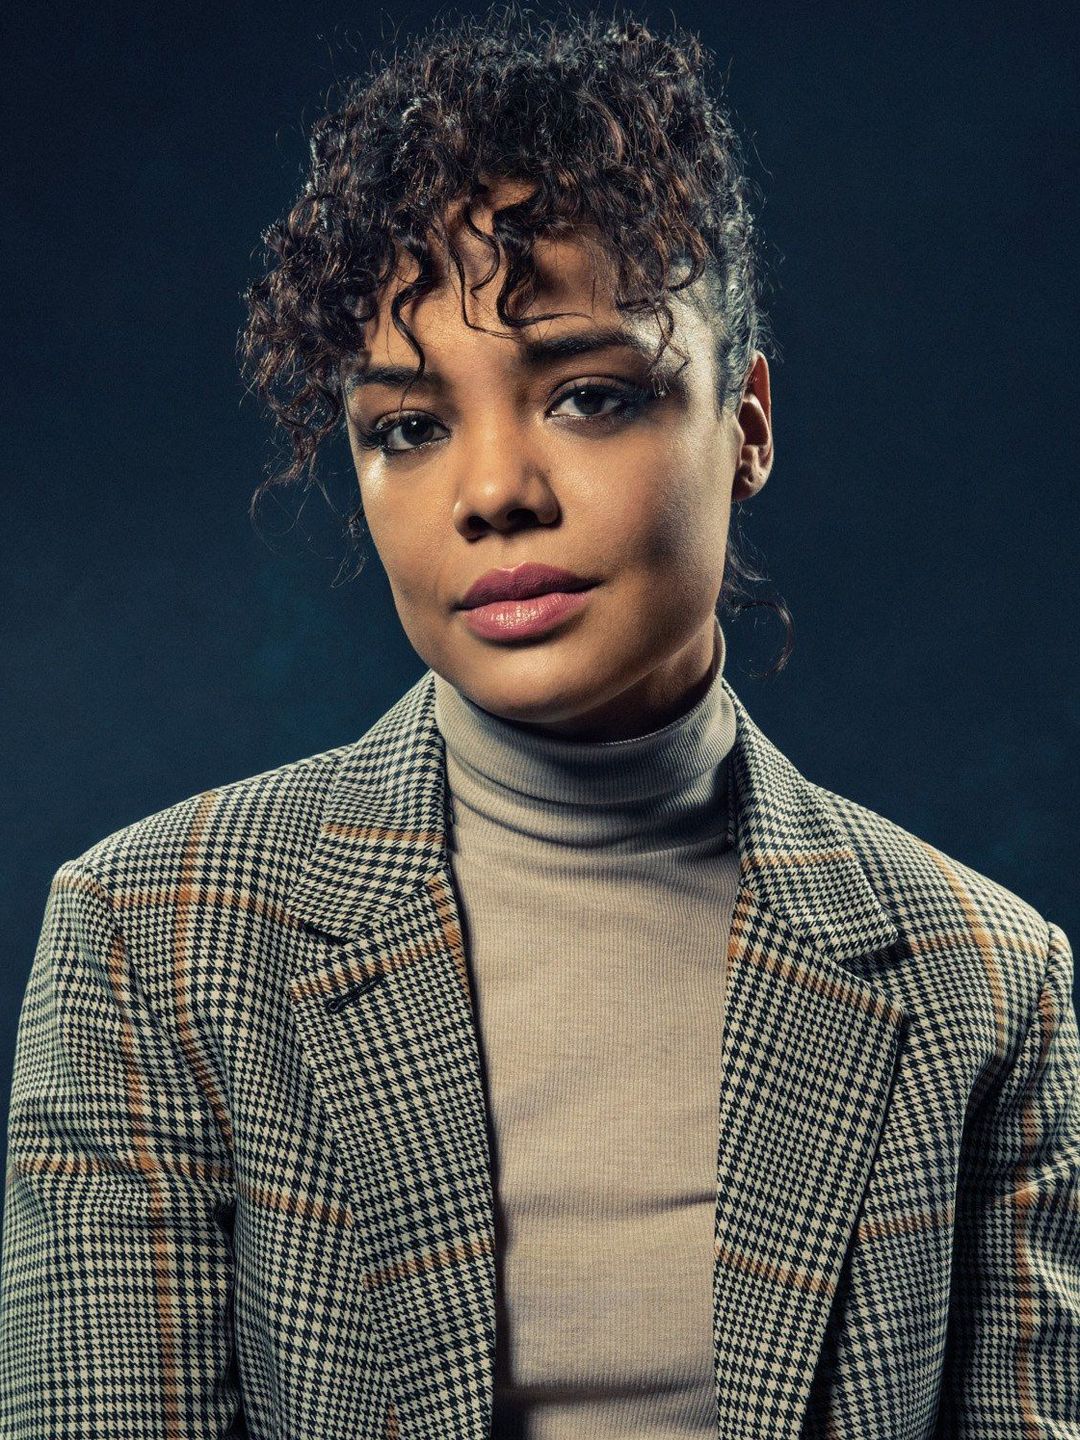 Tessa Thompson in her youth